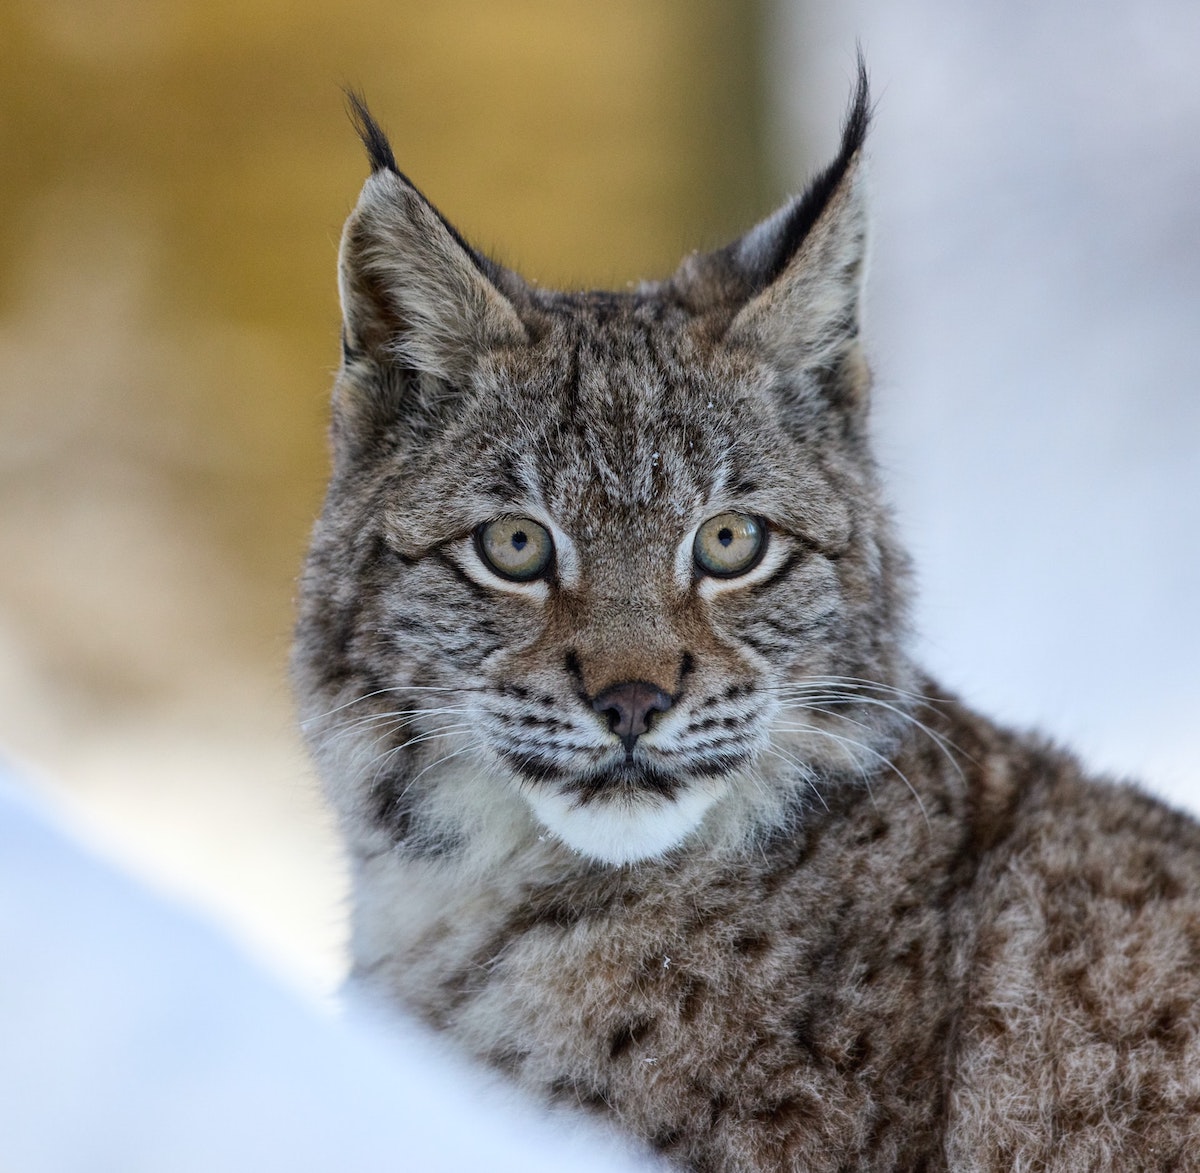 Growing support for the re-introduction of lynx to Scotland